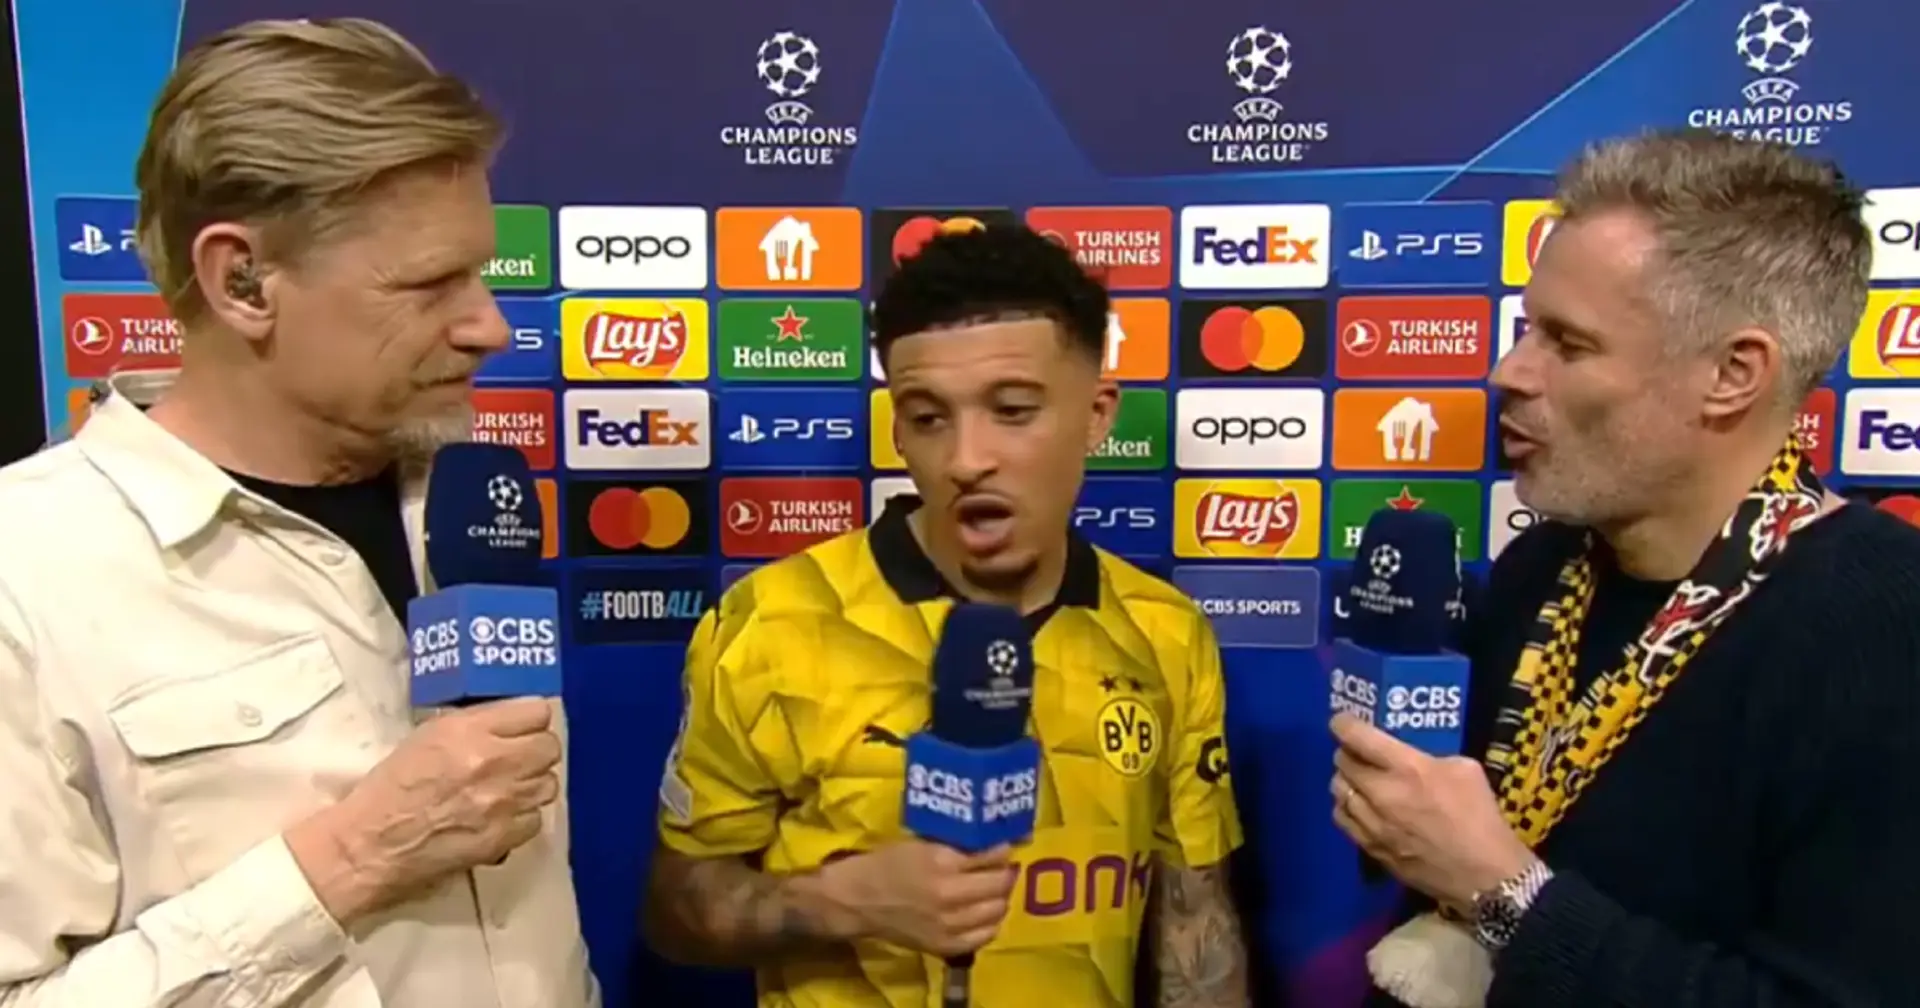 'I really don't know': Jadon Sancho gives honest answer on his Man United future after beating PSG